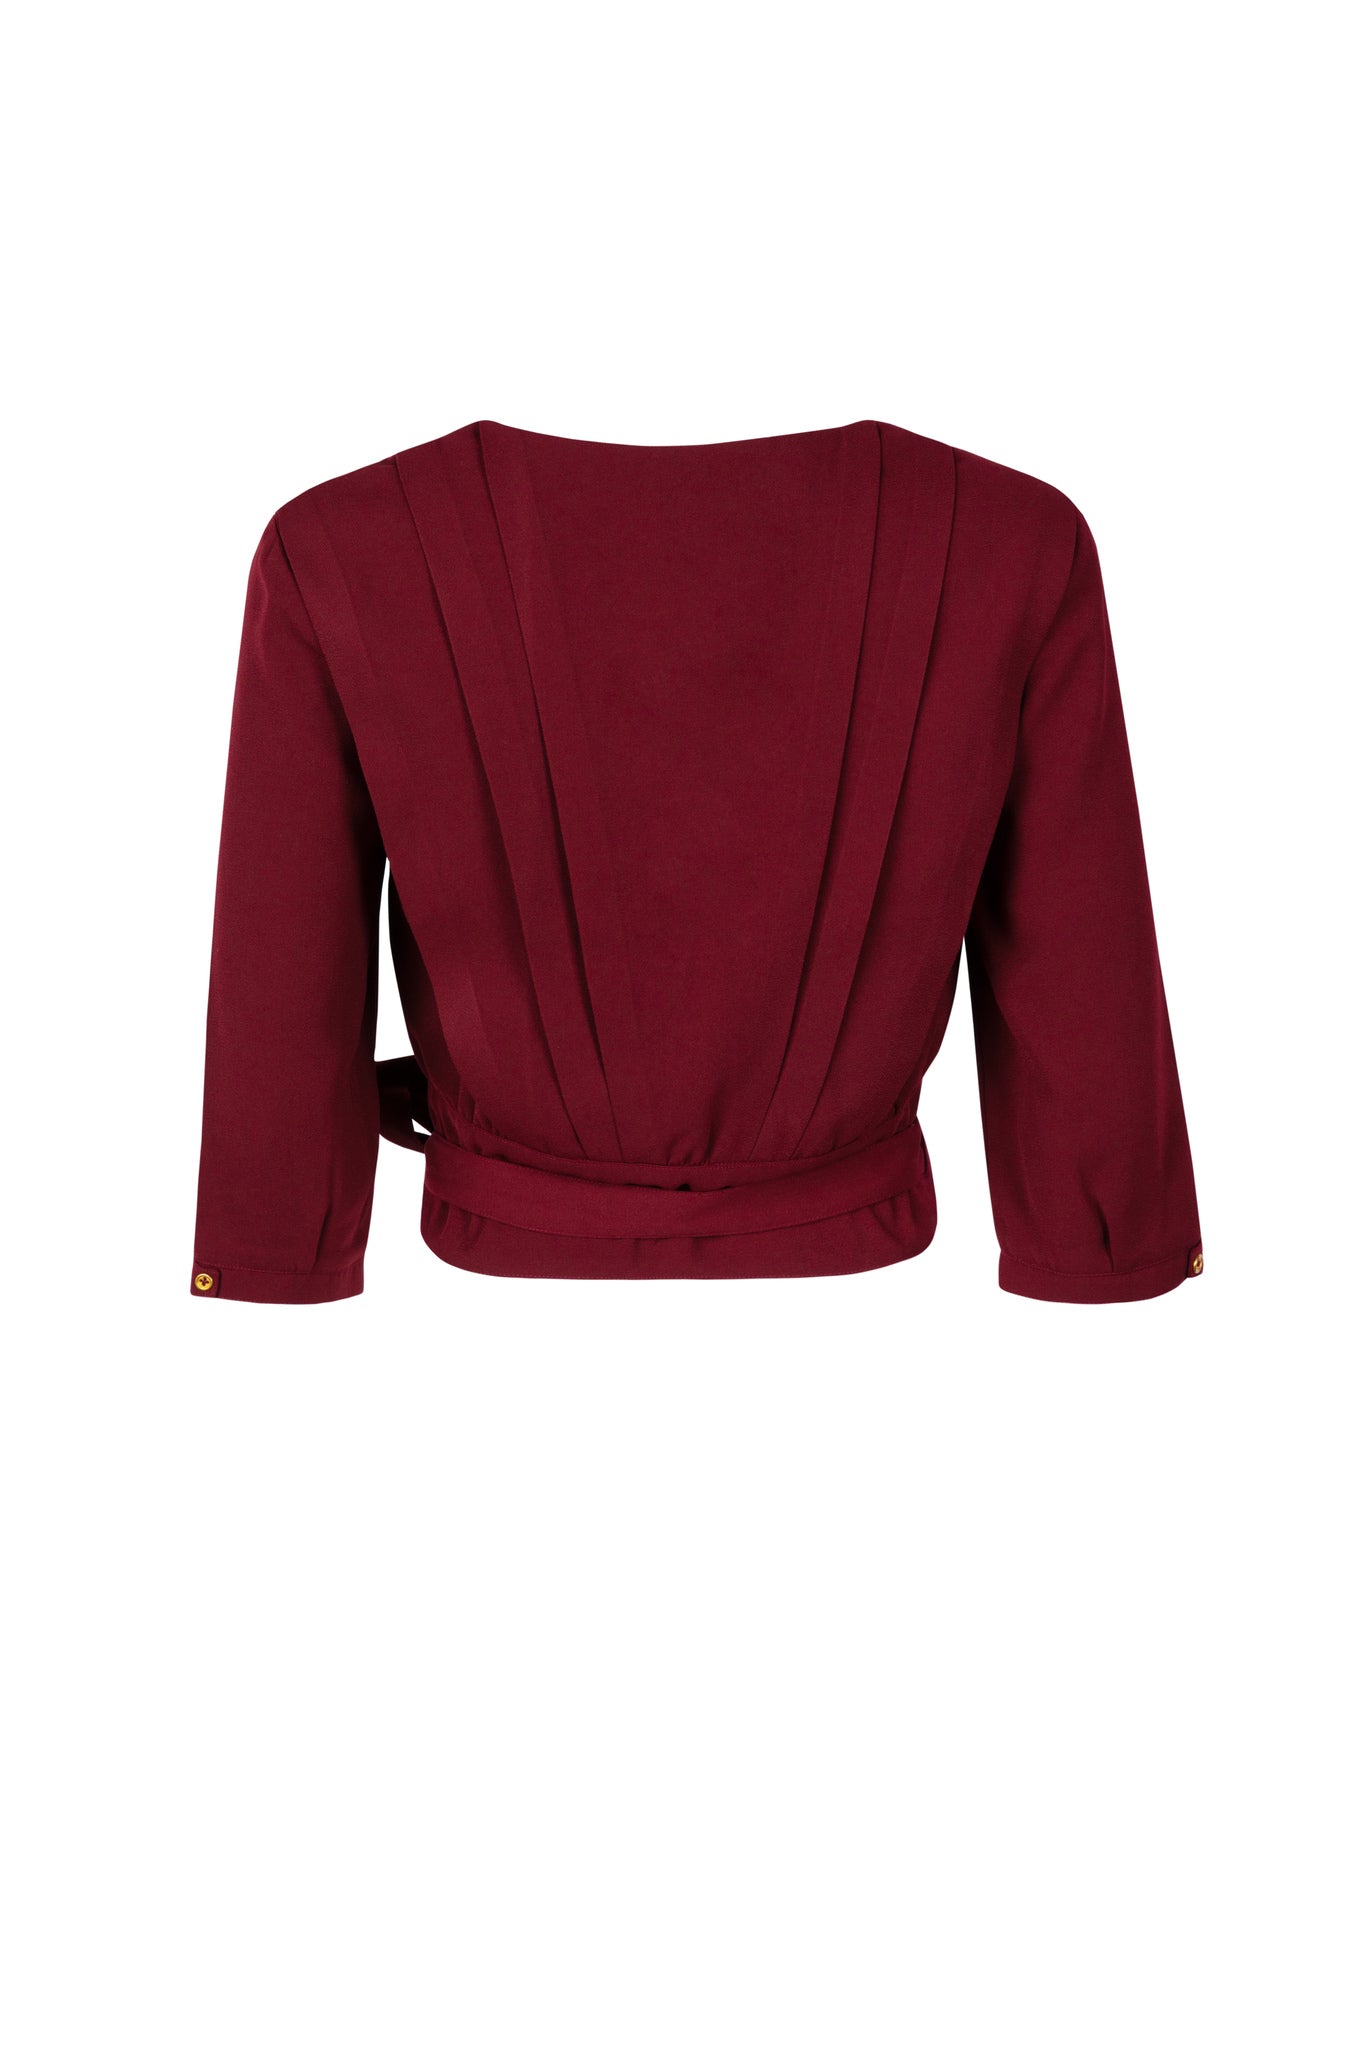 Back view of pleated maroon shirt with sleeves